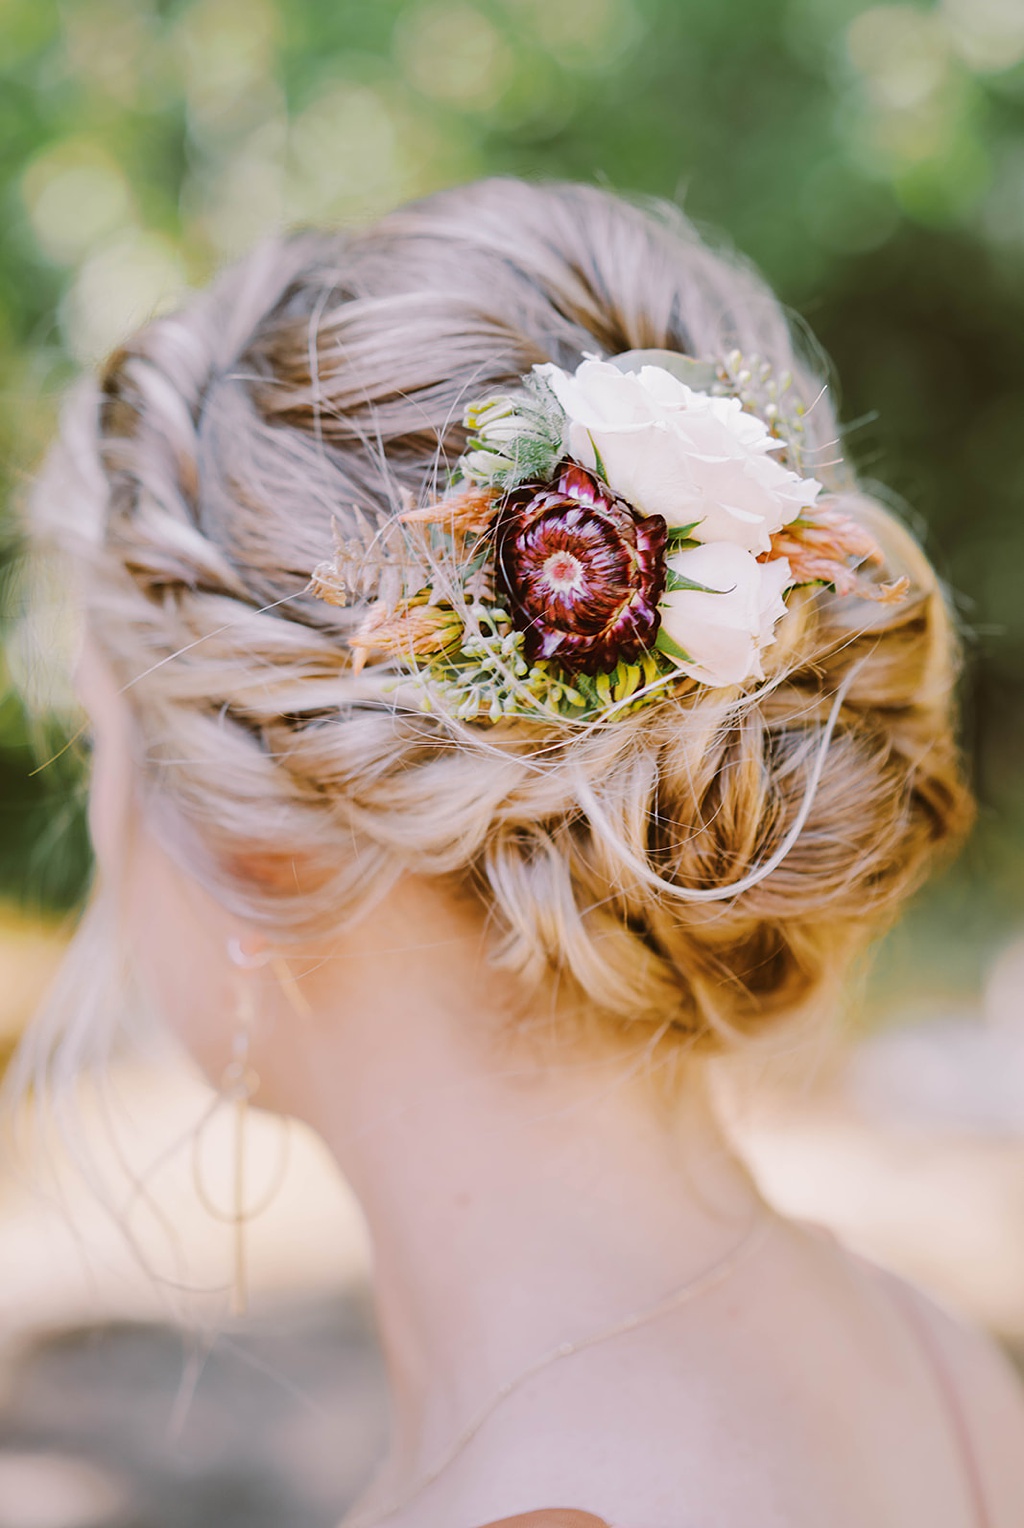 A bridesmaid with hair florals